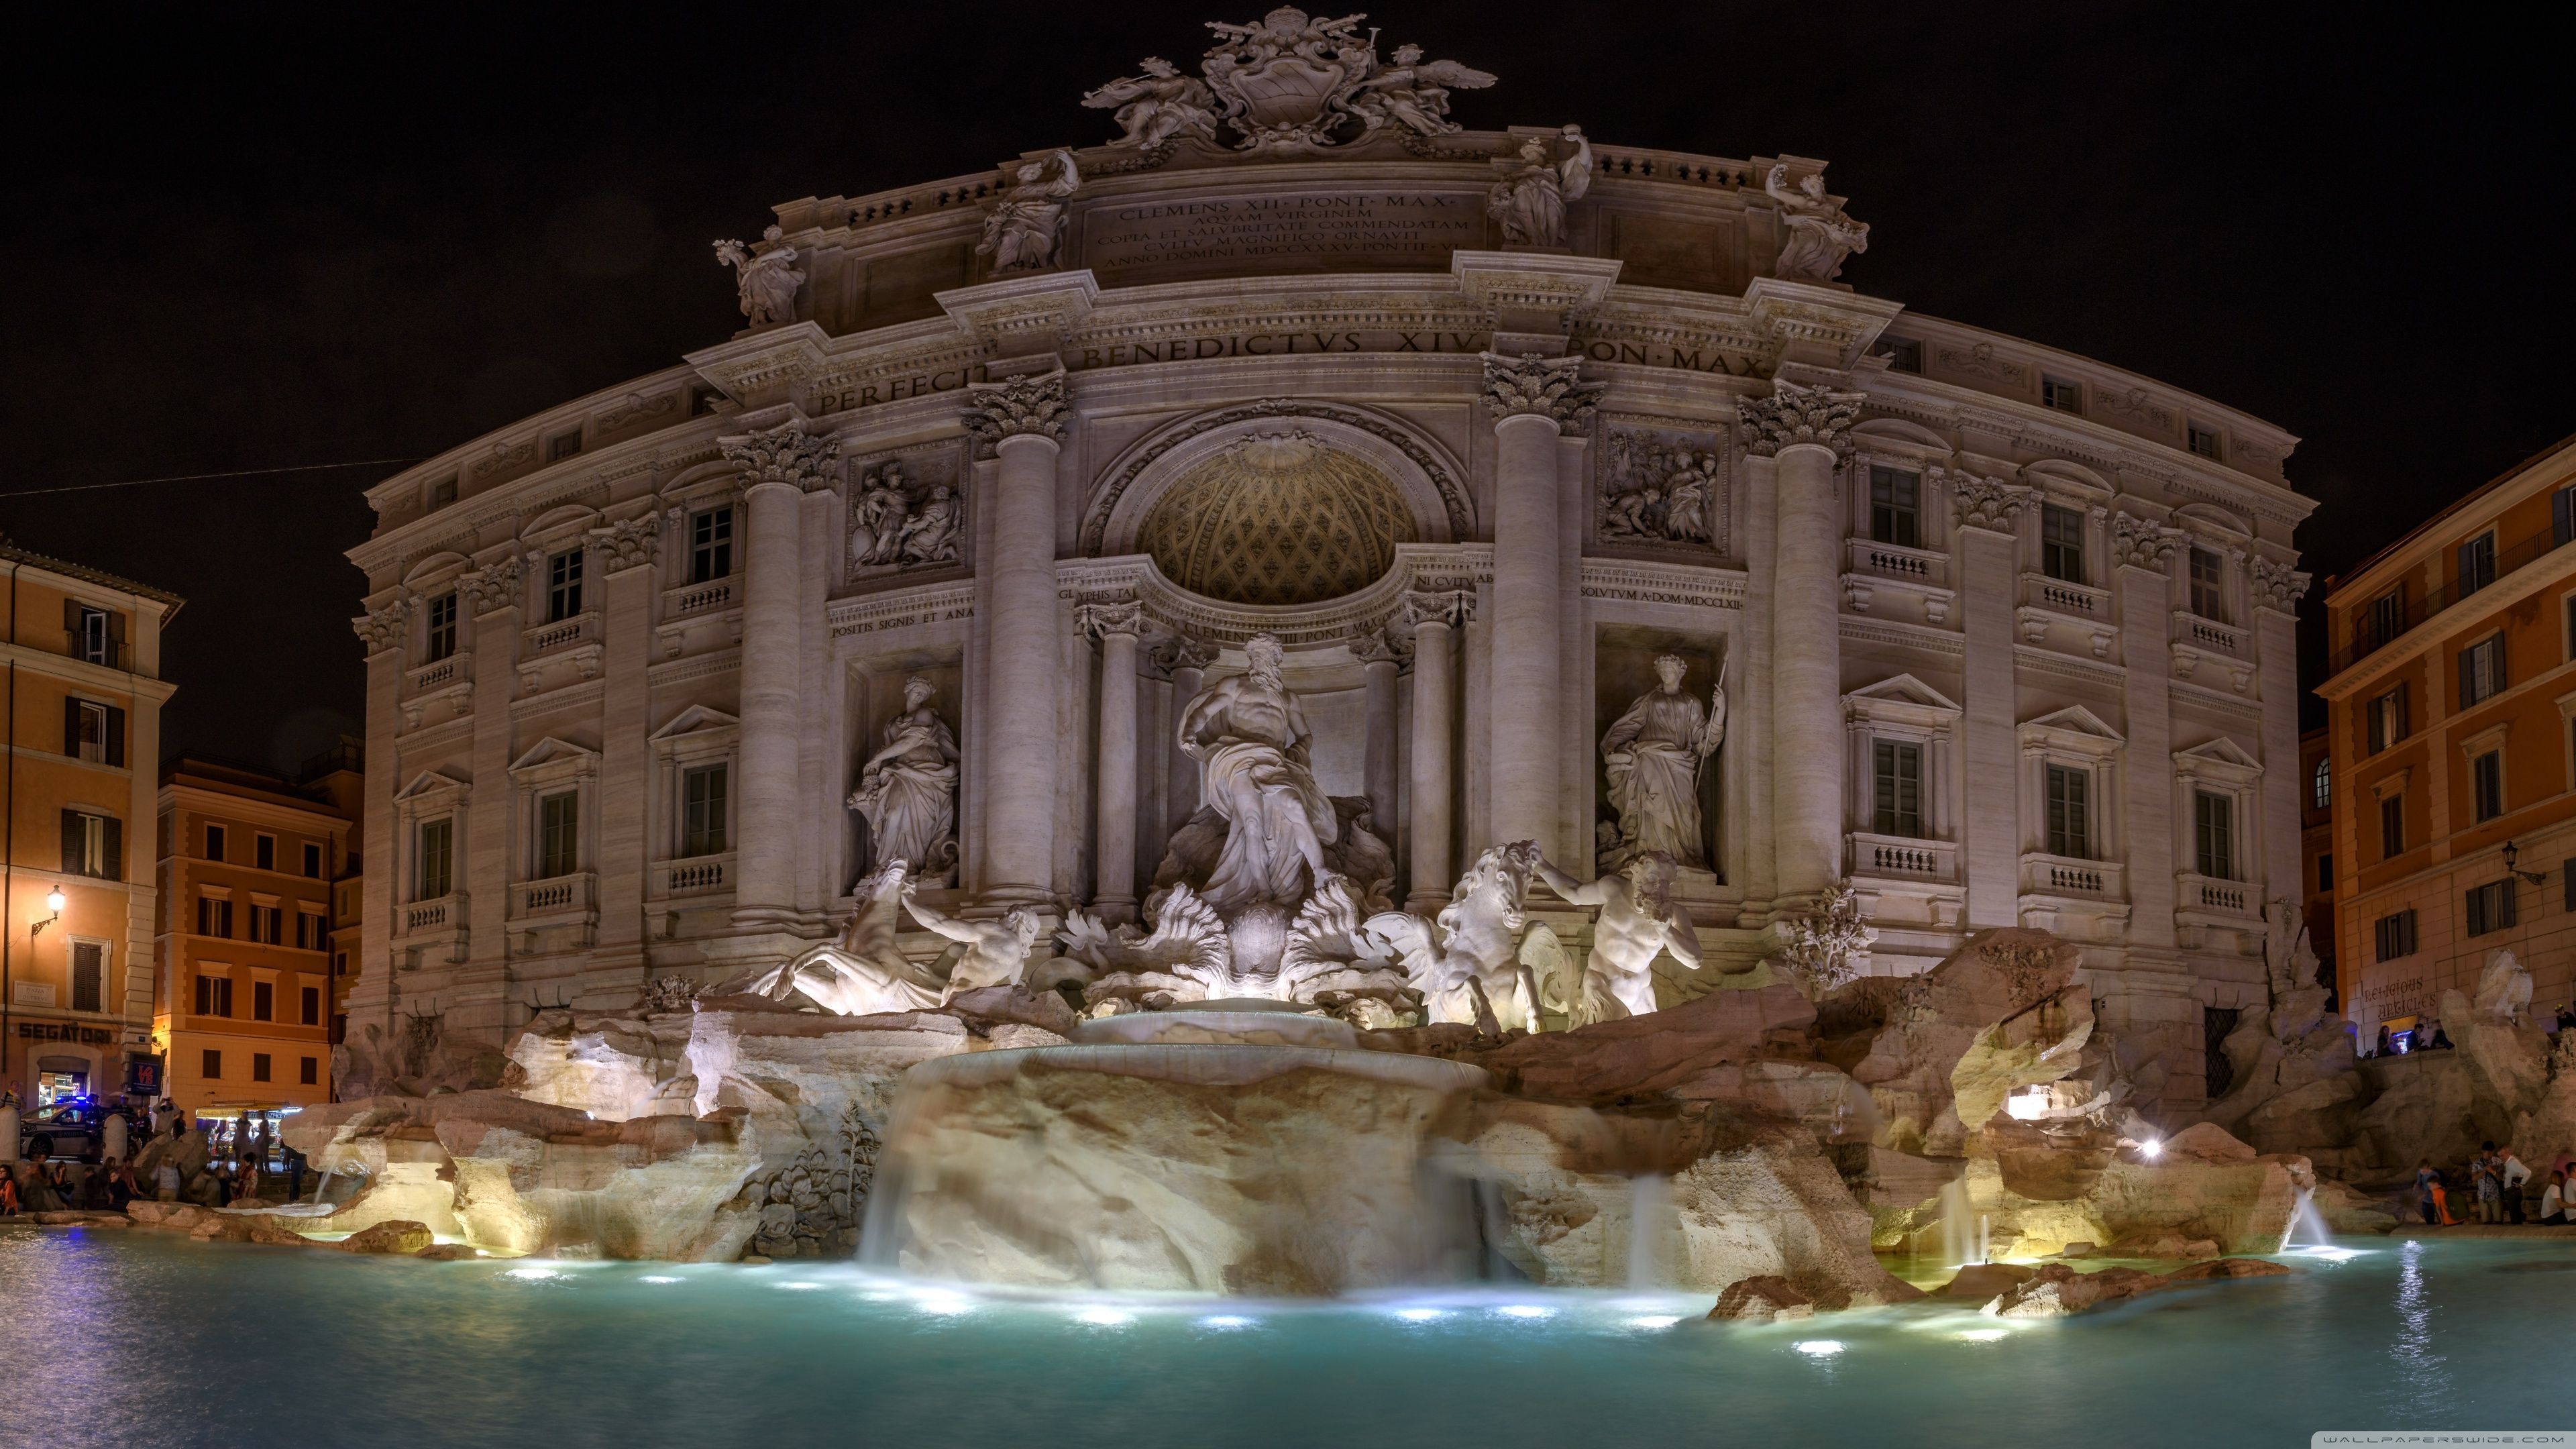 Italy At Night Wallpaper For iPhone. Trevi fountain, Trevi